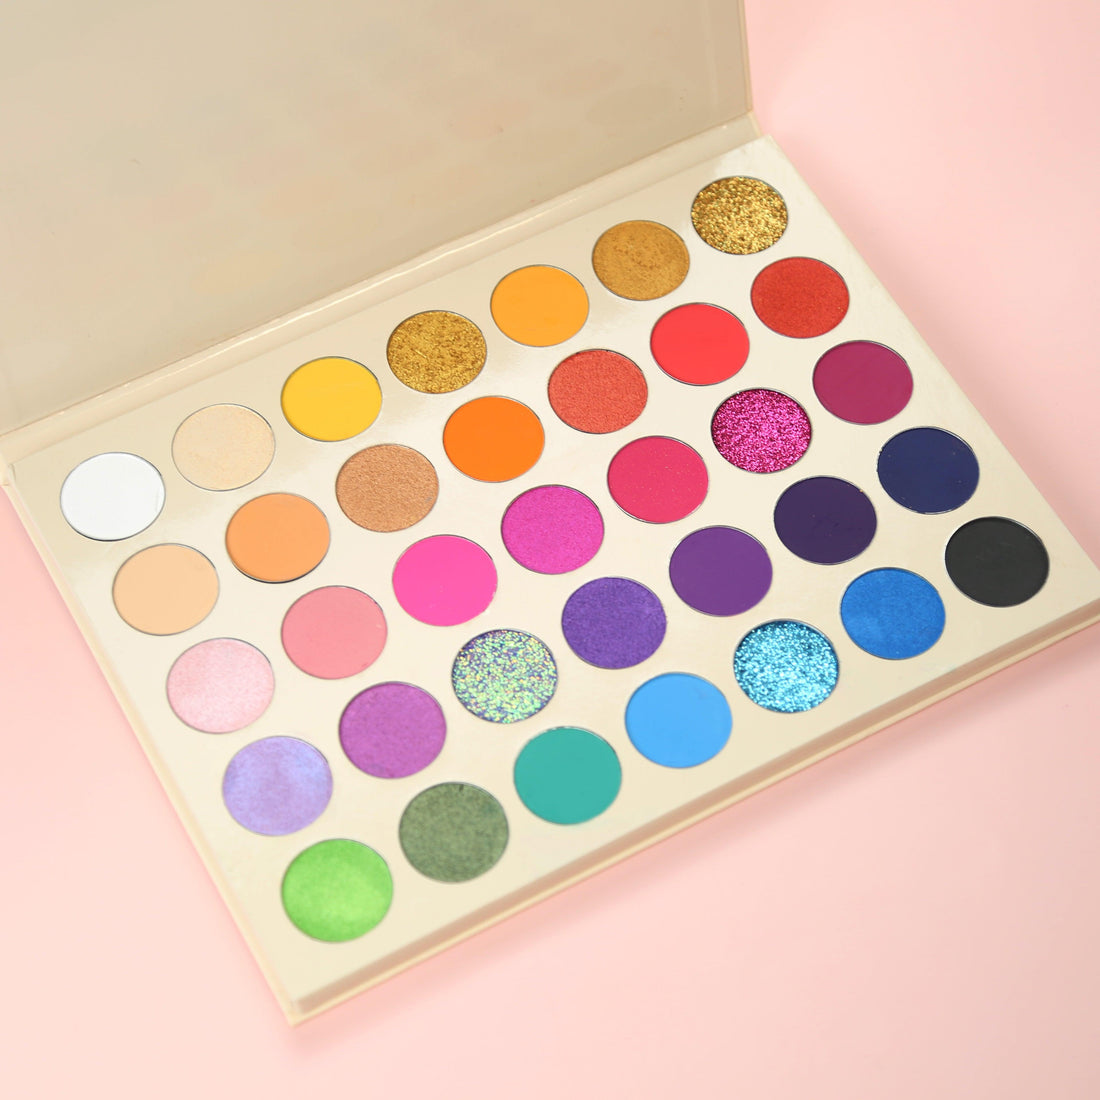 Colorful 35 Pans Pro Eyeshadow Palette (2 types) - Makeup Palette Pro